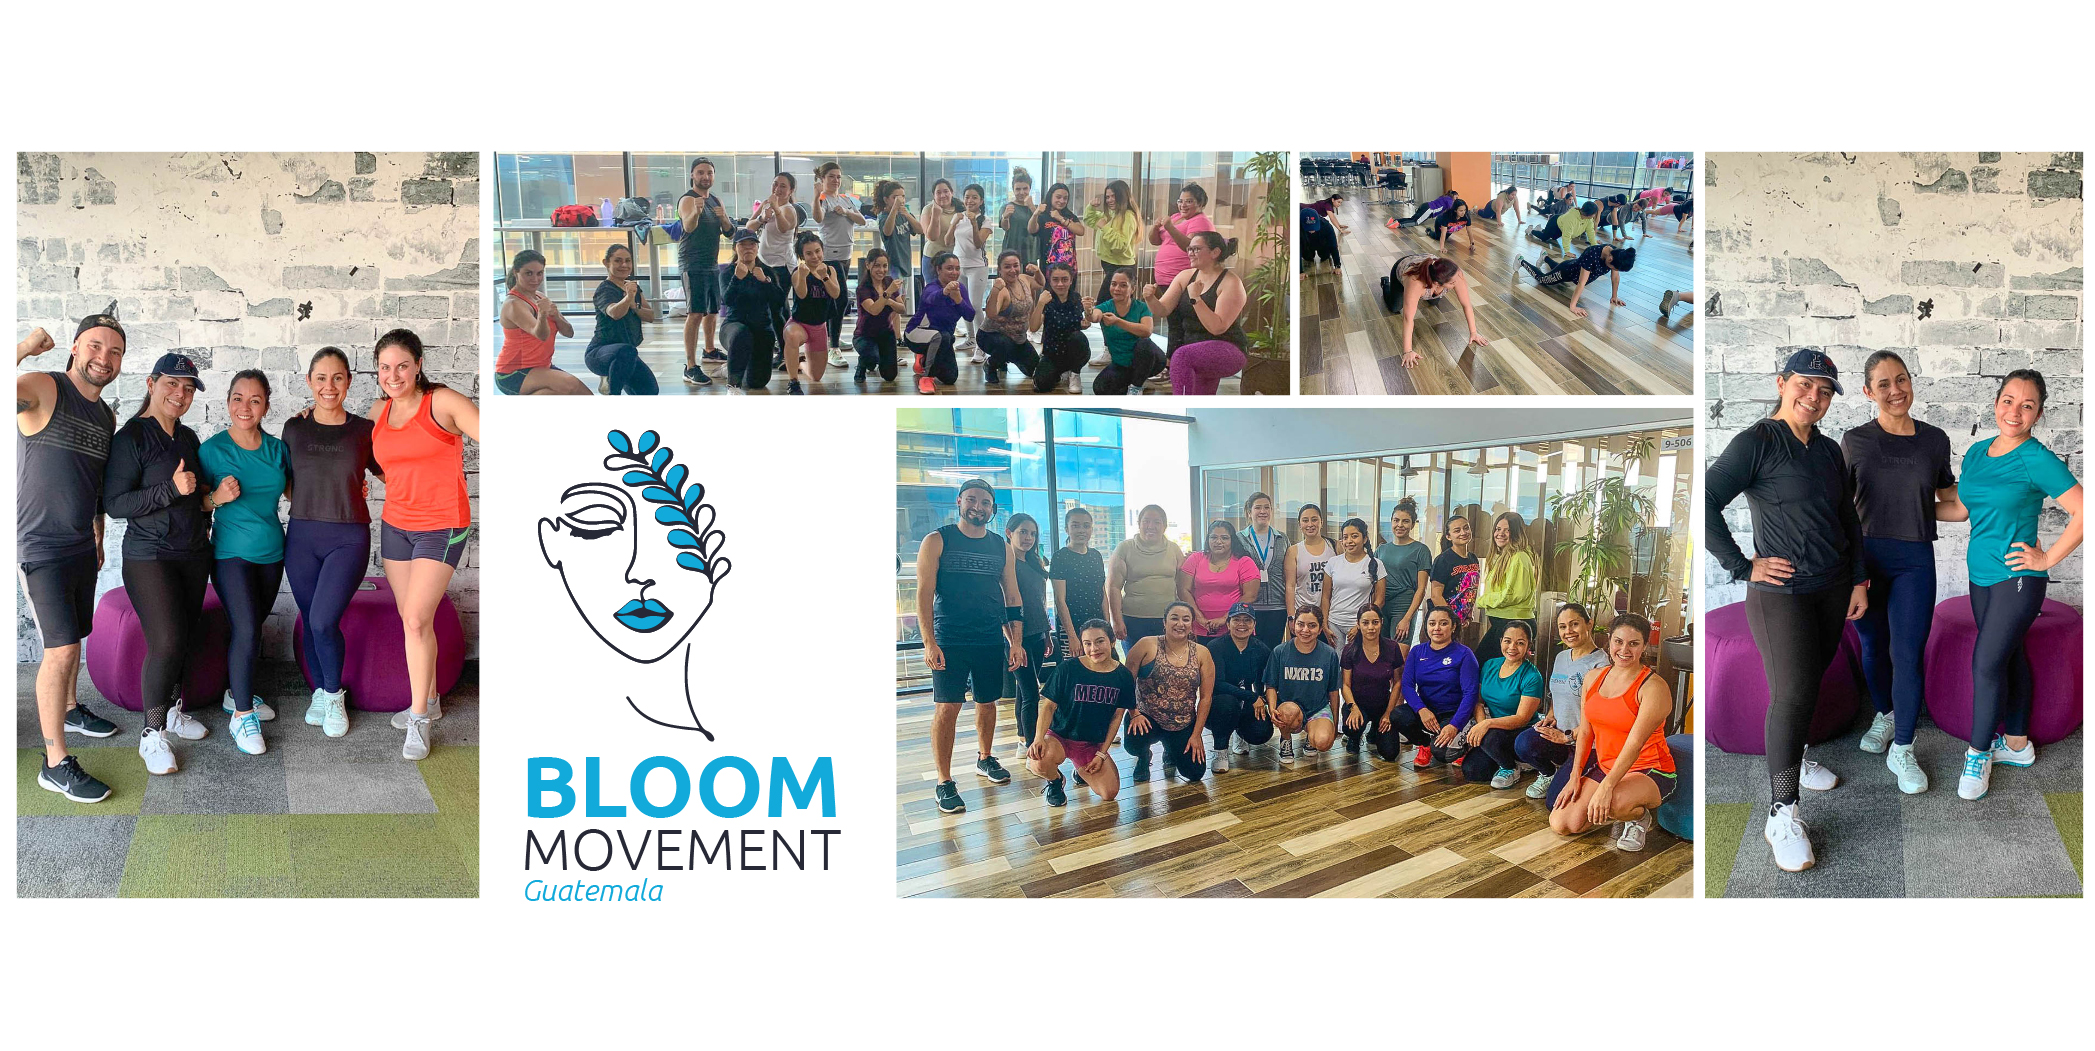 The BLOOM Movement Guatemala is a community-driven initiative focused on fostering unity among women and nurturing personal growth through a supportive network across the organization.